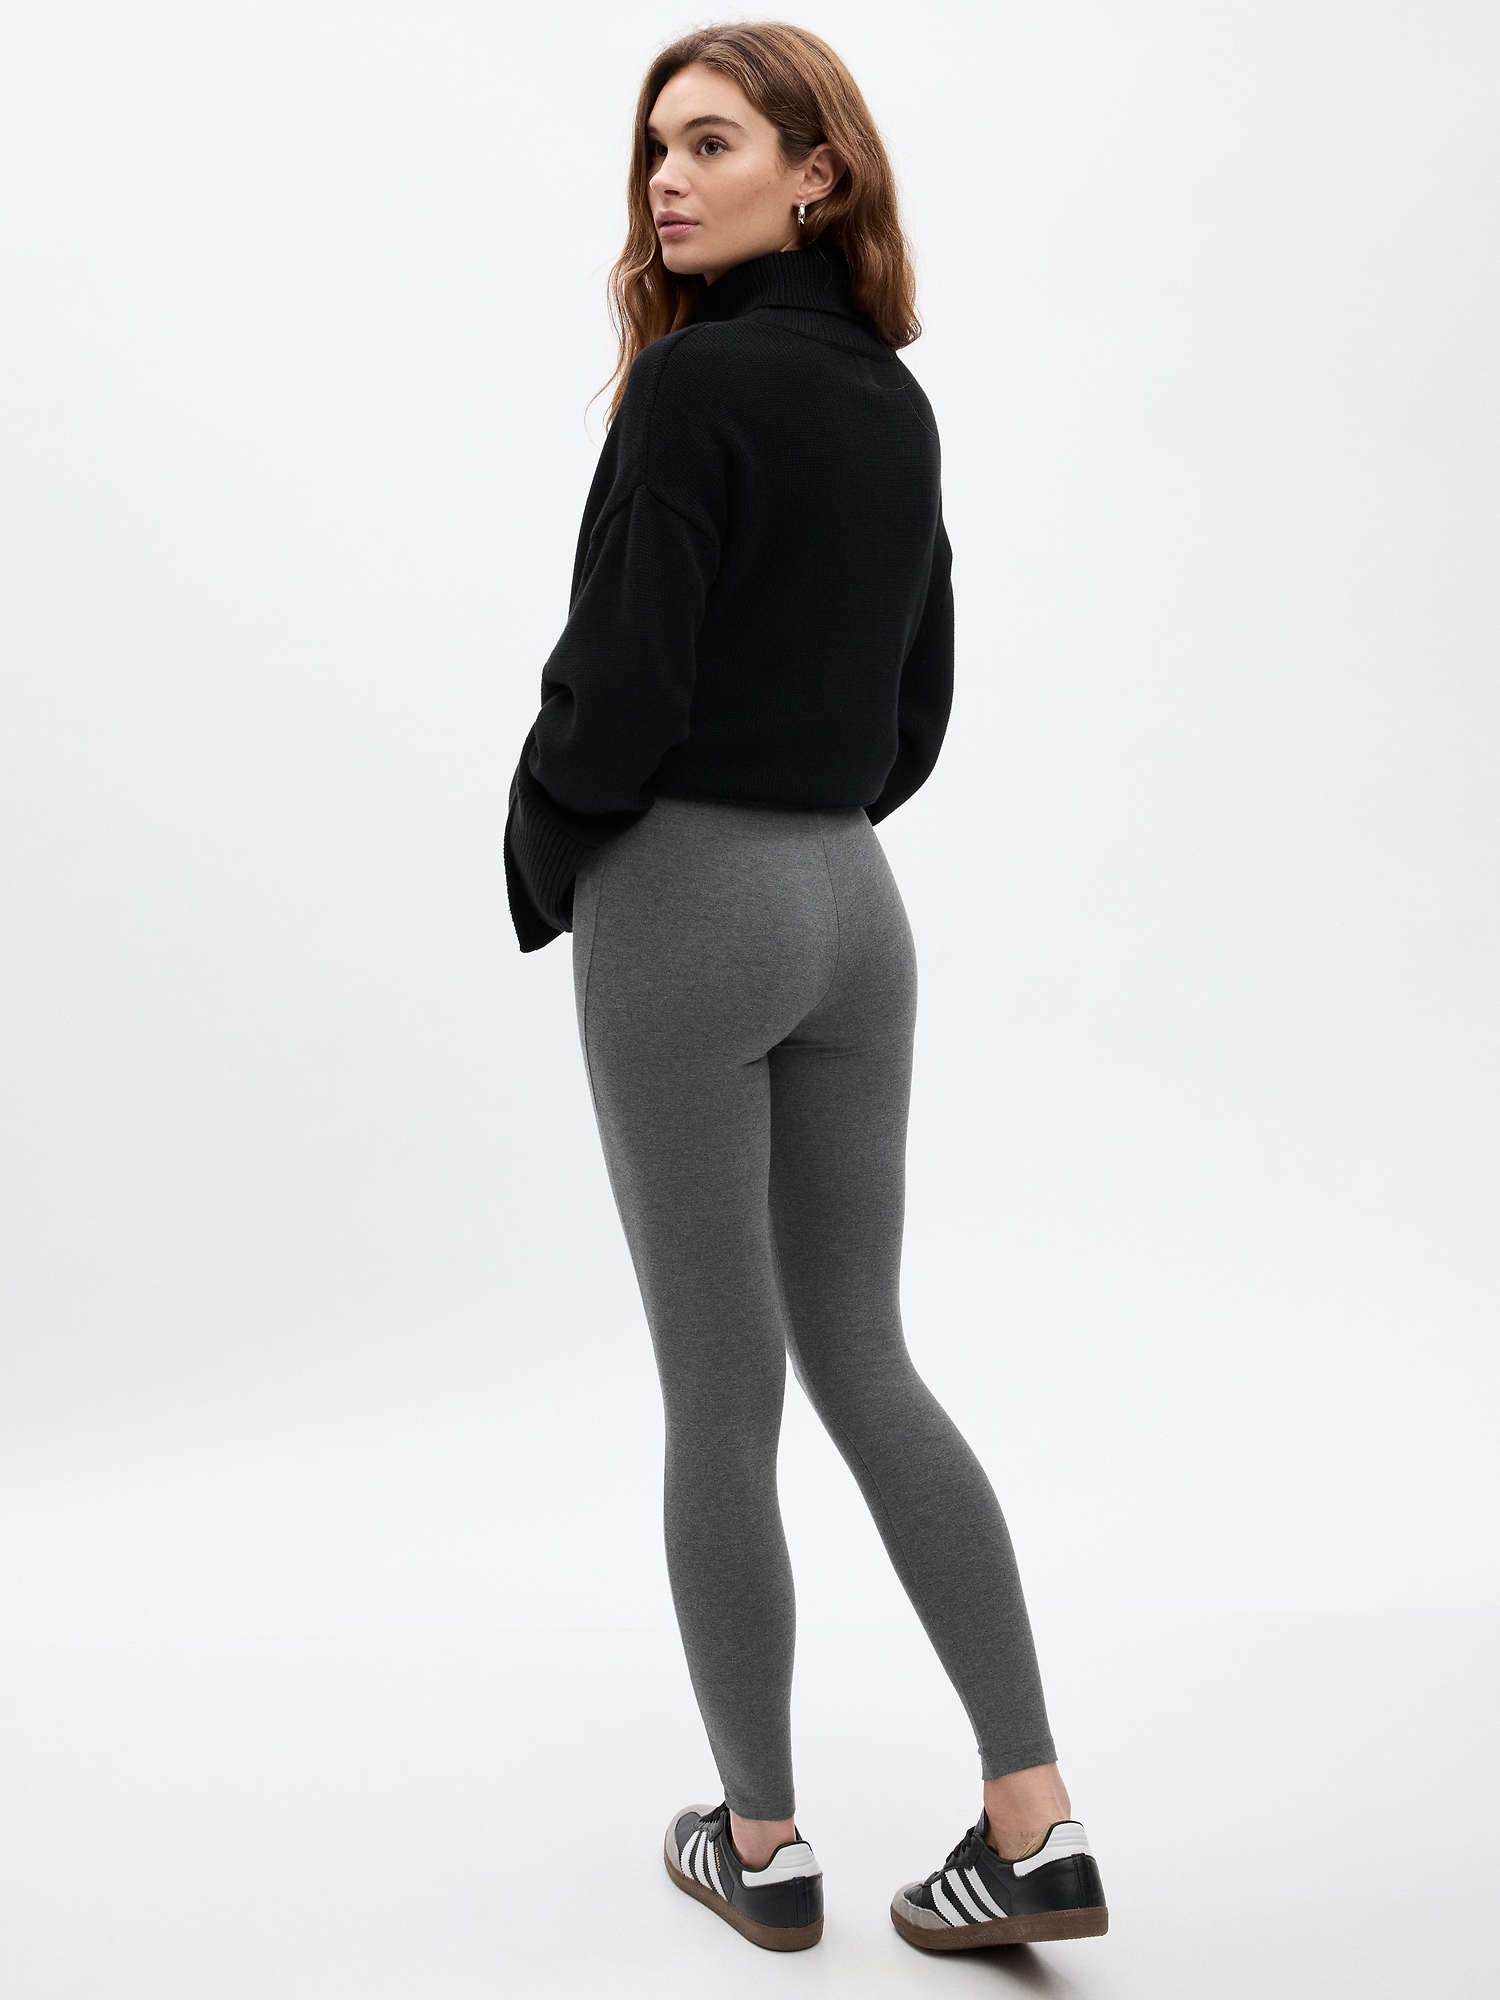 How to keep leggings from stretching out